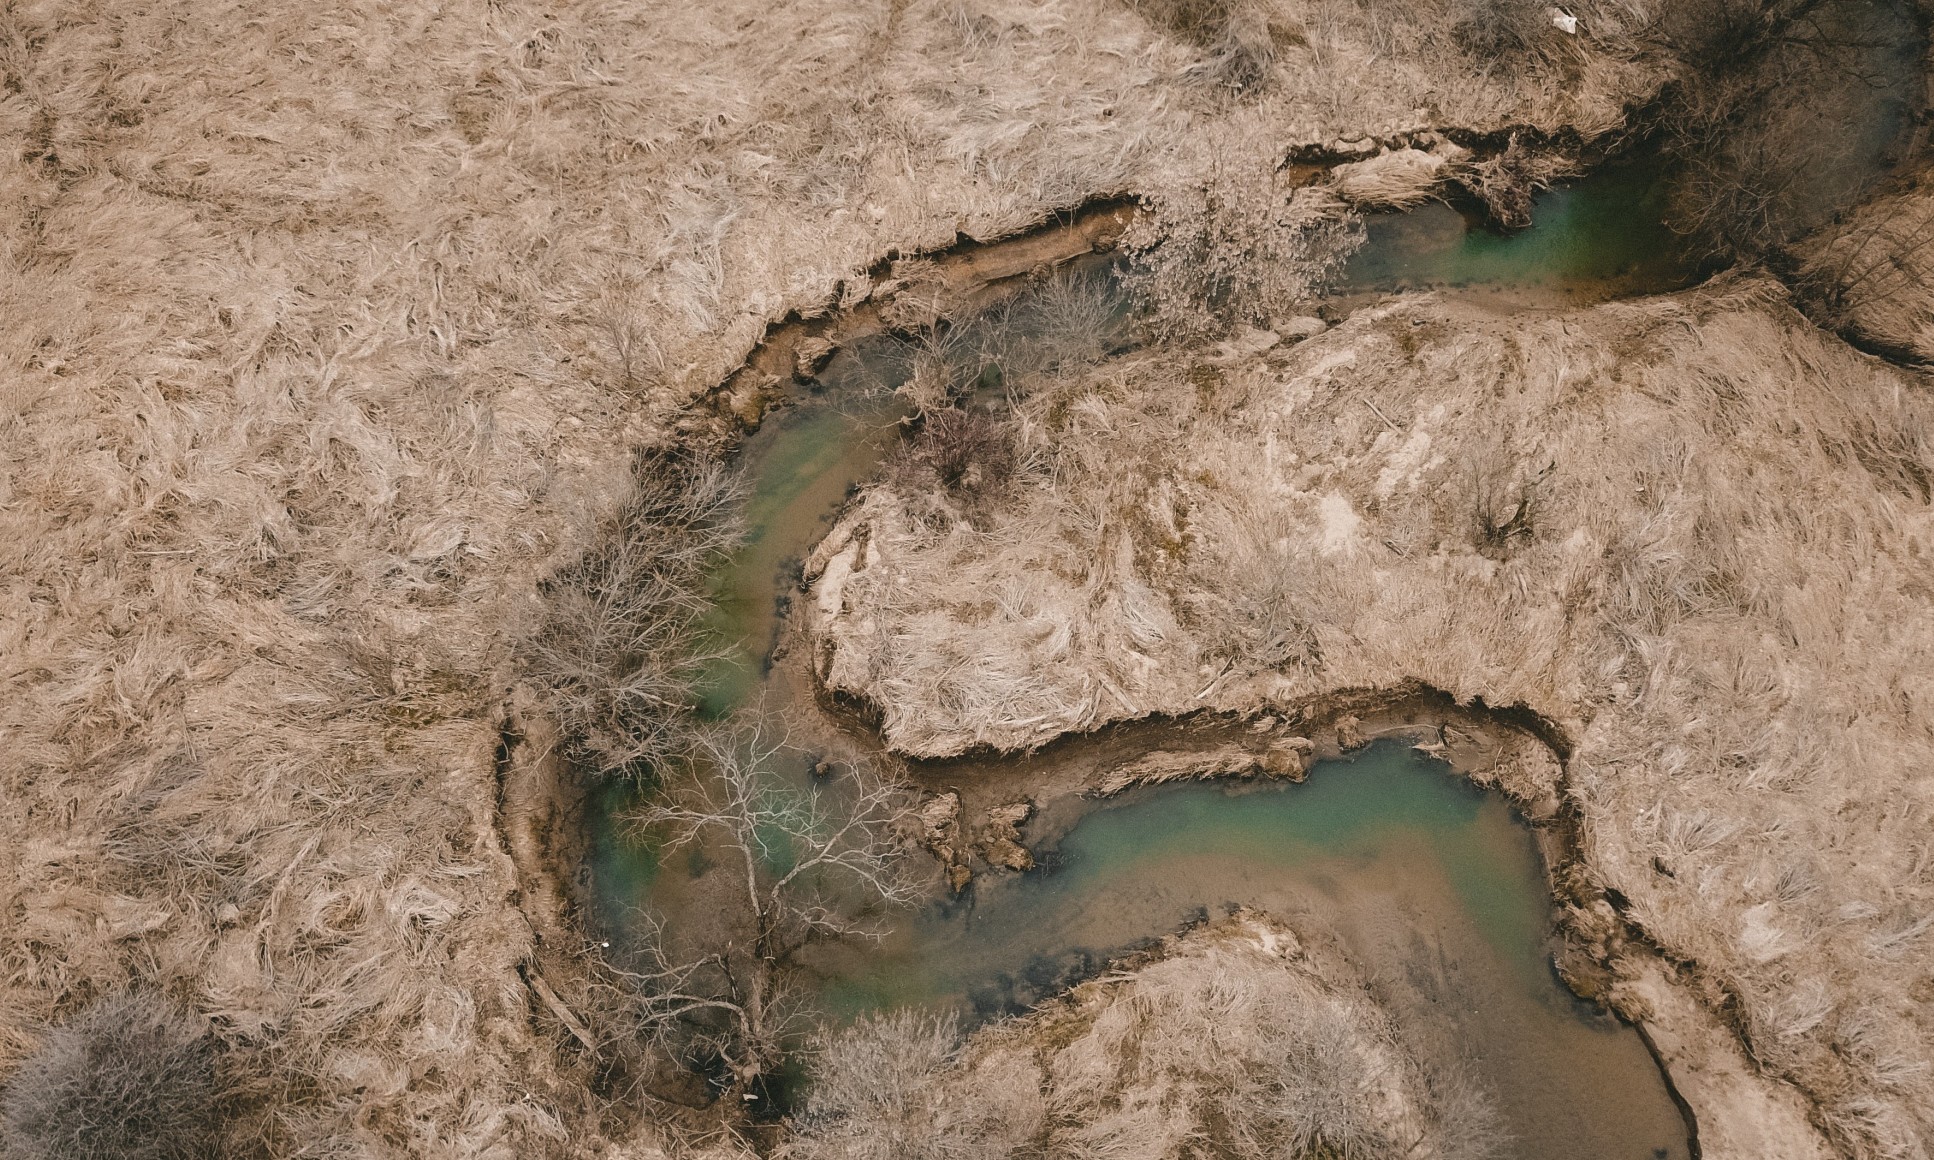 Aerial image of winding river surrounded by brown, arid grass and dying trees.